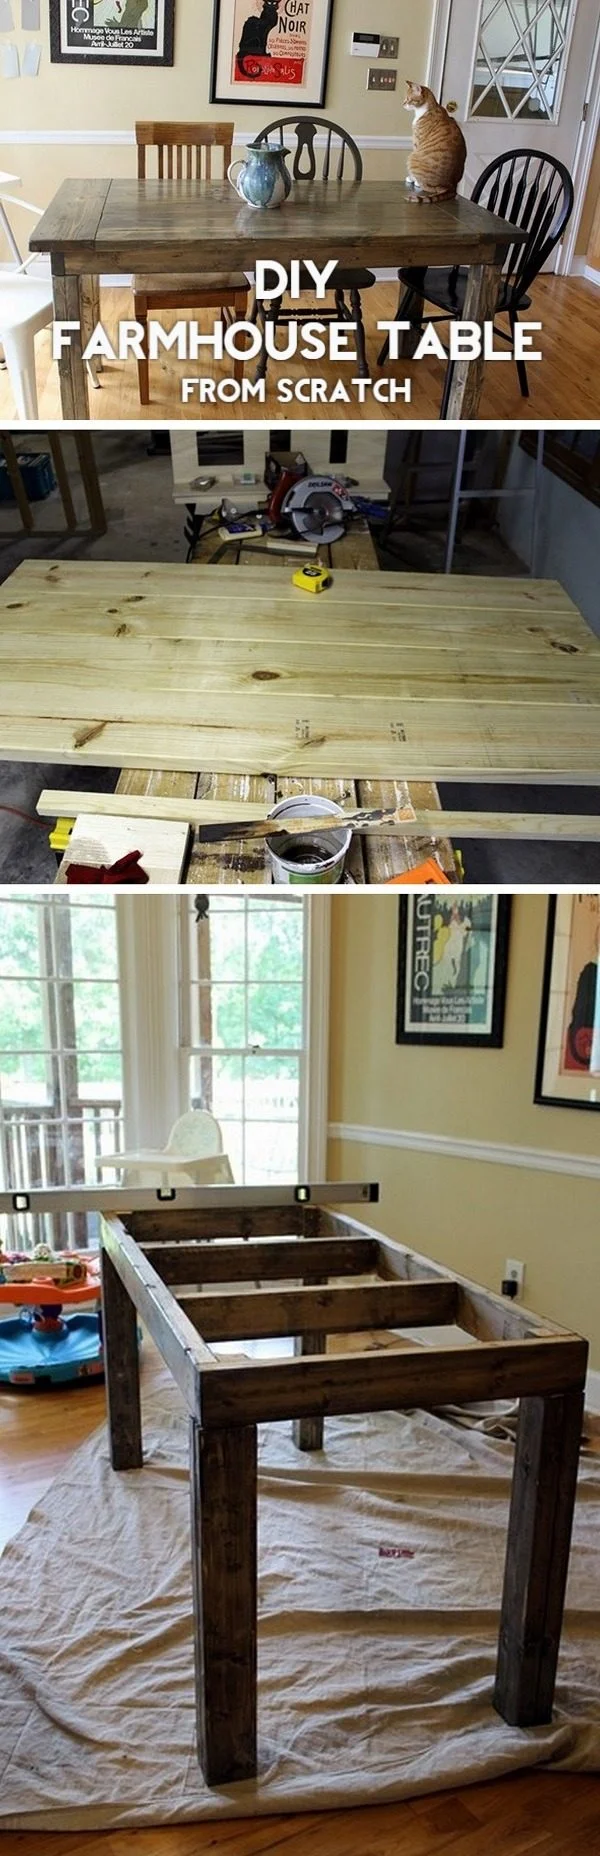 Check out the tutorial how to build a   dining table from scratch   